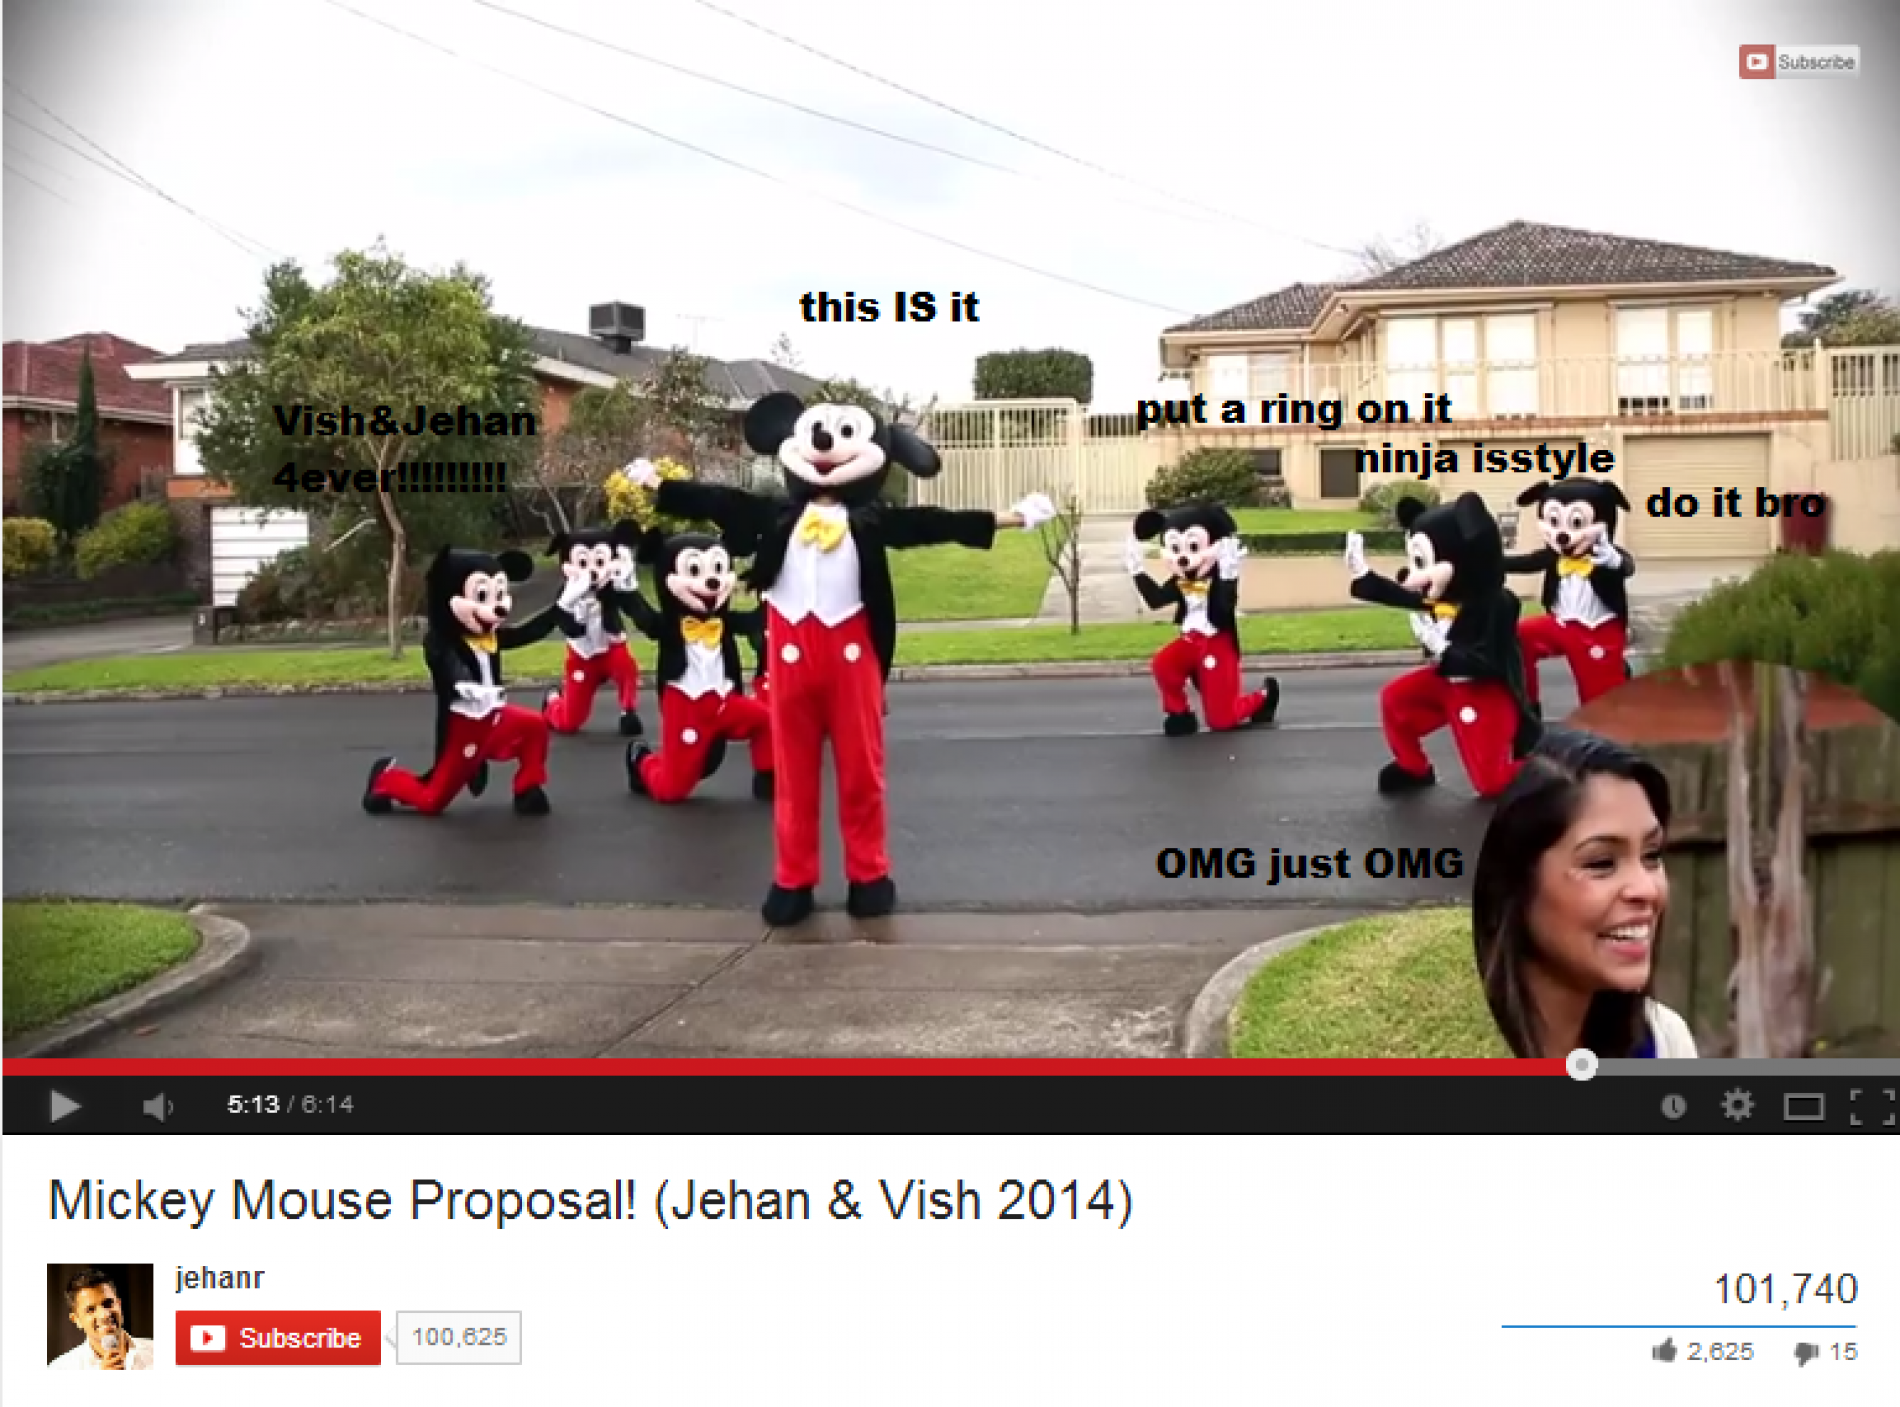 Jehan R: Mickey Mouse Proposal